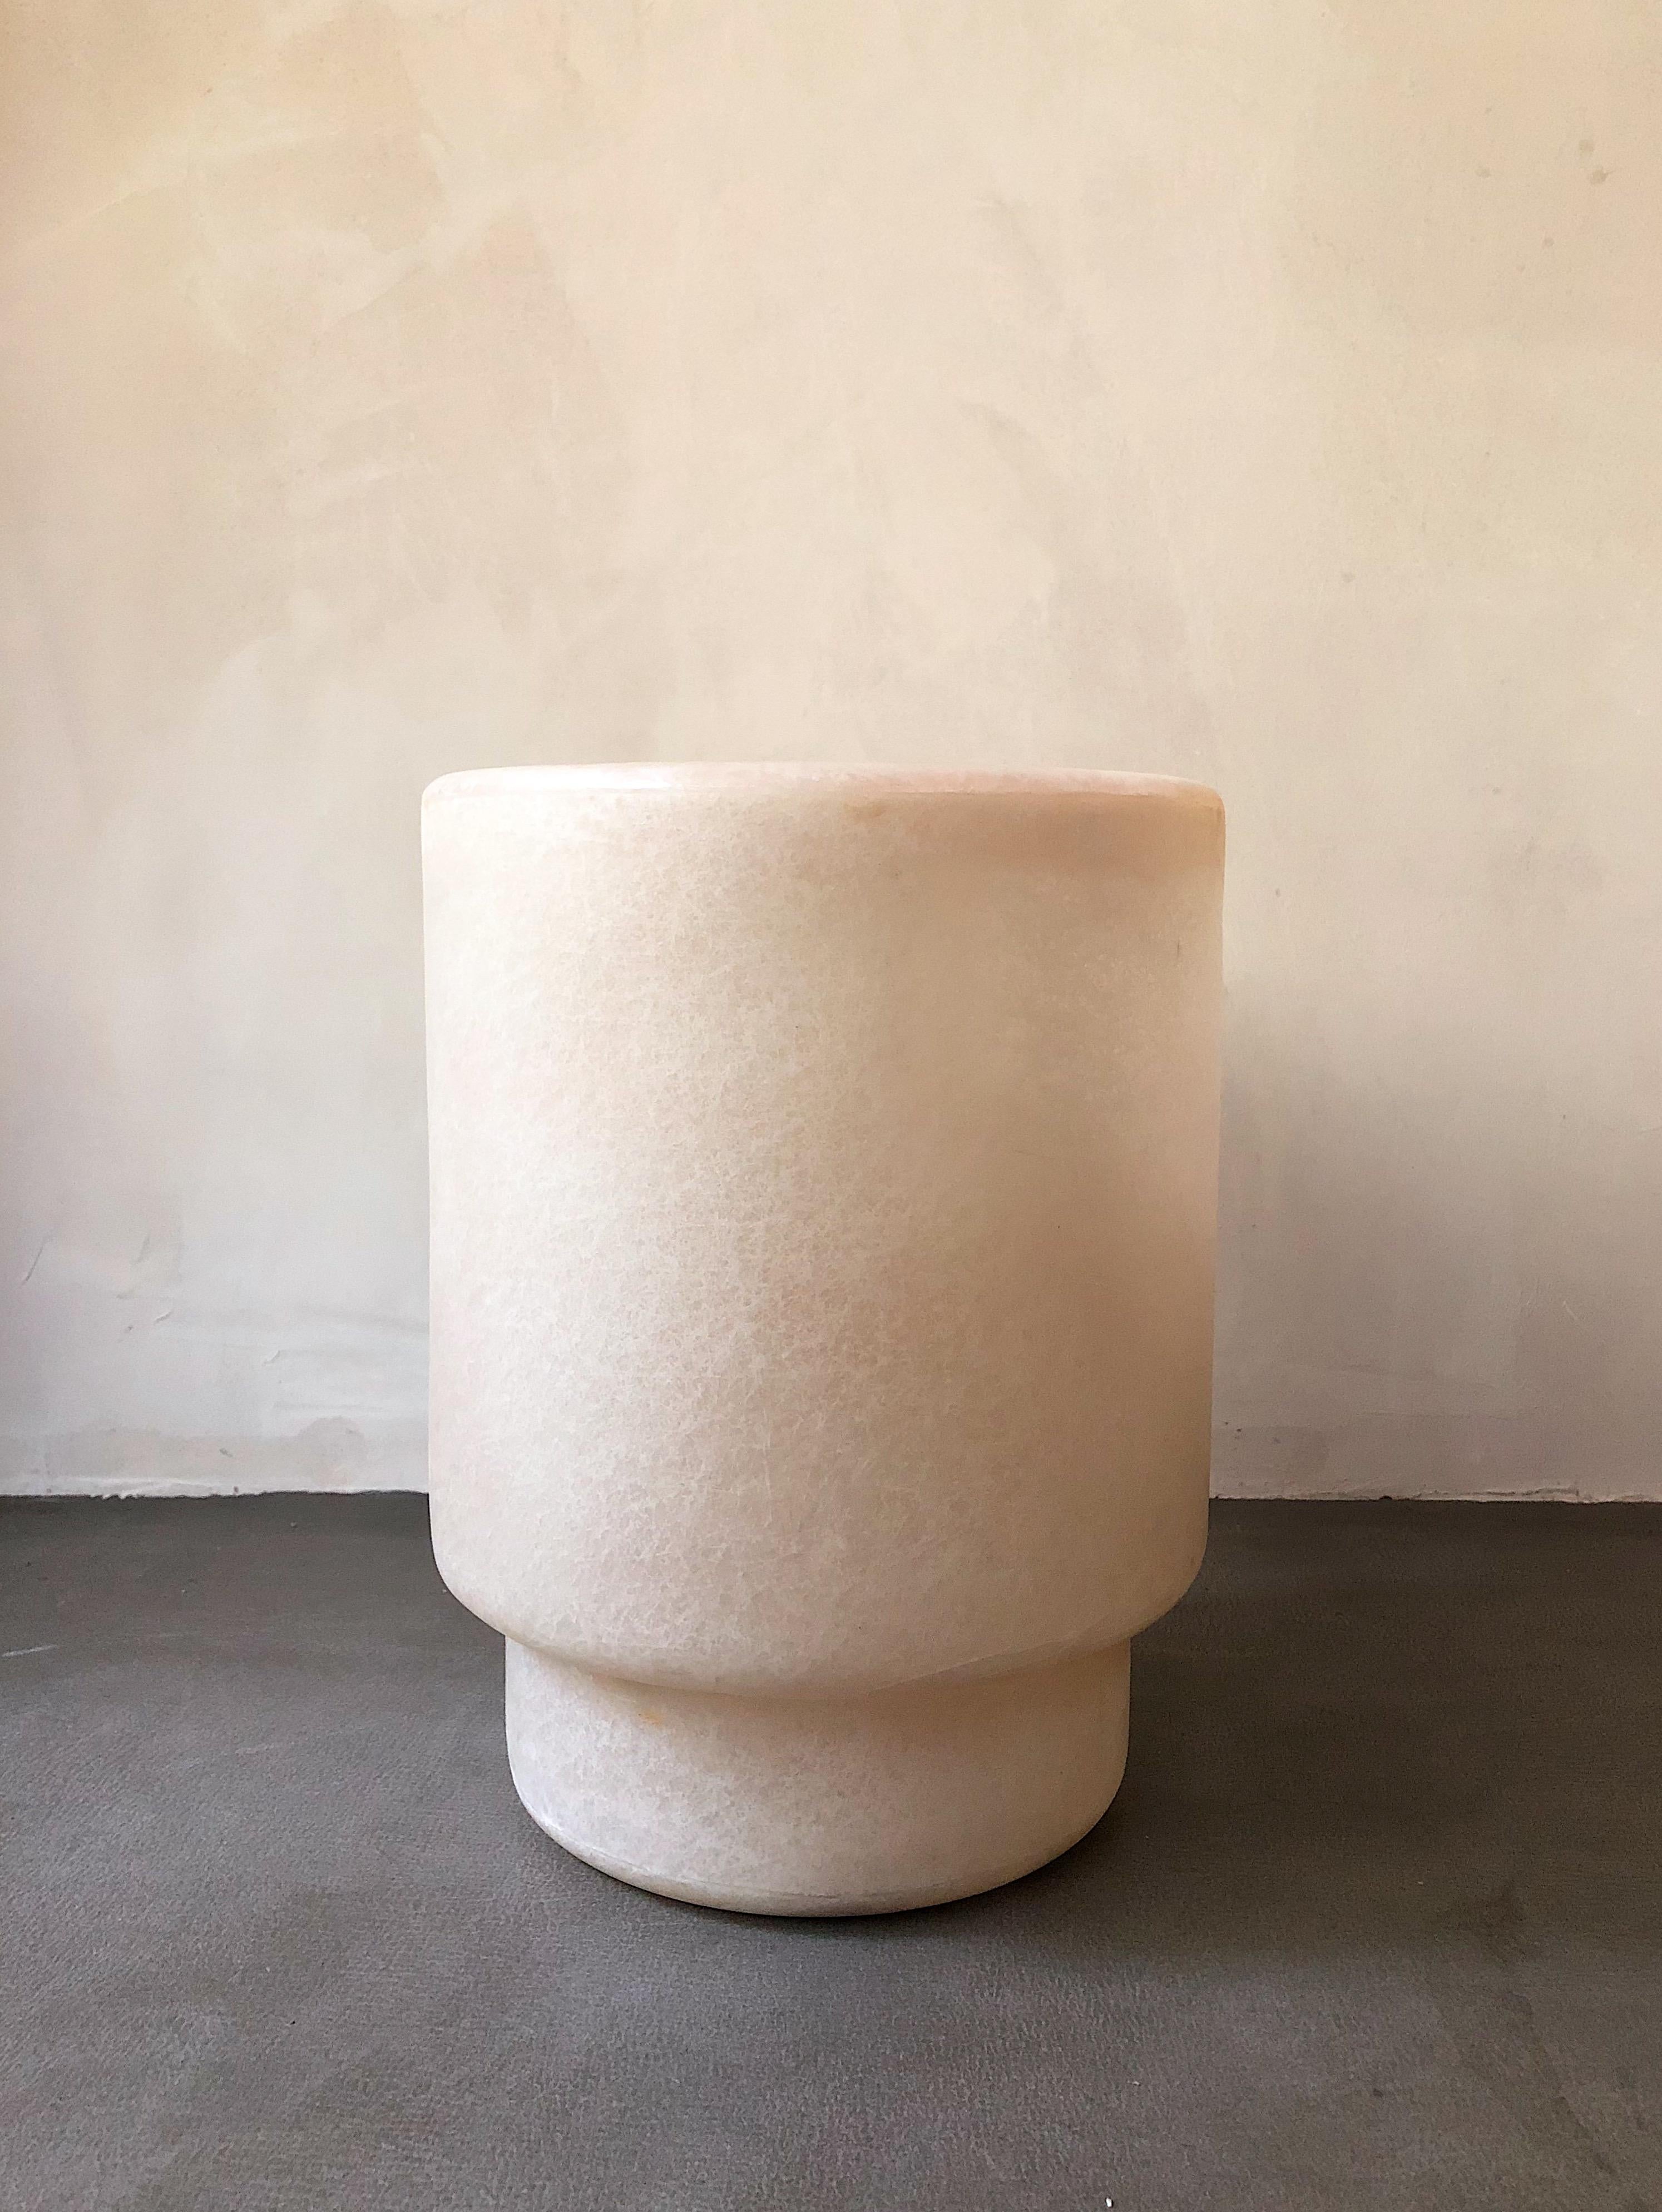 Tong white vase by Karstudio.
Materials: FRP
Dimensions: 26 x 26 x 34 cm

*This piece is suitable for outdoor use.

A smooth shape for integrating into any space. Multiple-use as a flower vase, a container for blueprints, posters, or as it